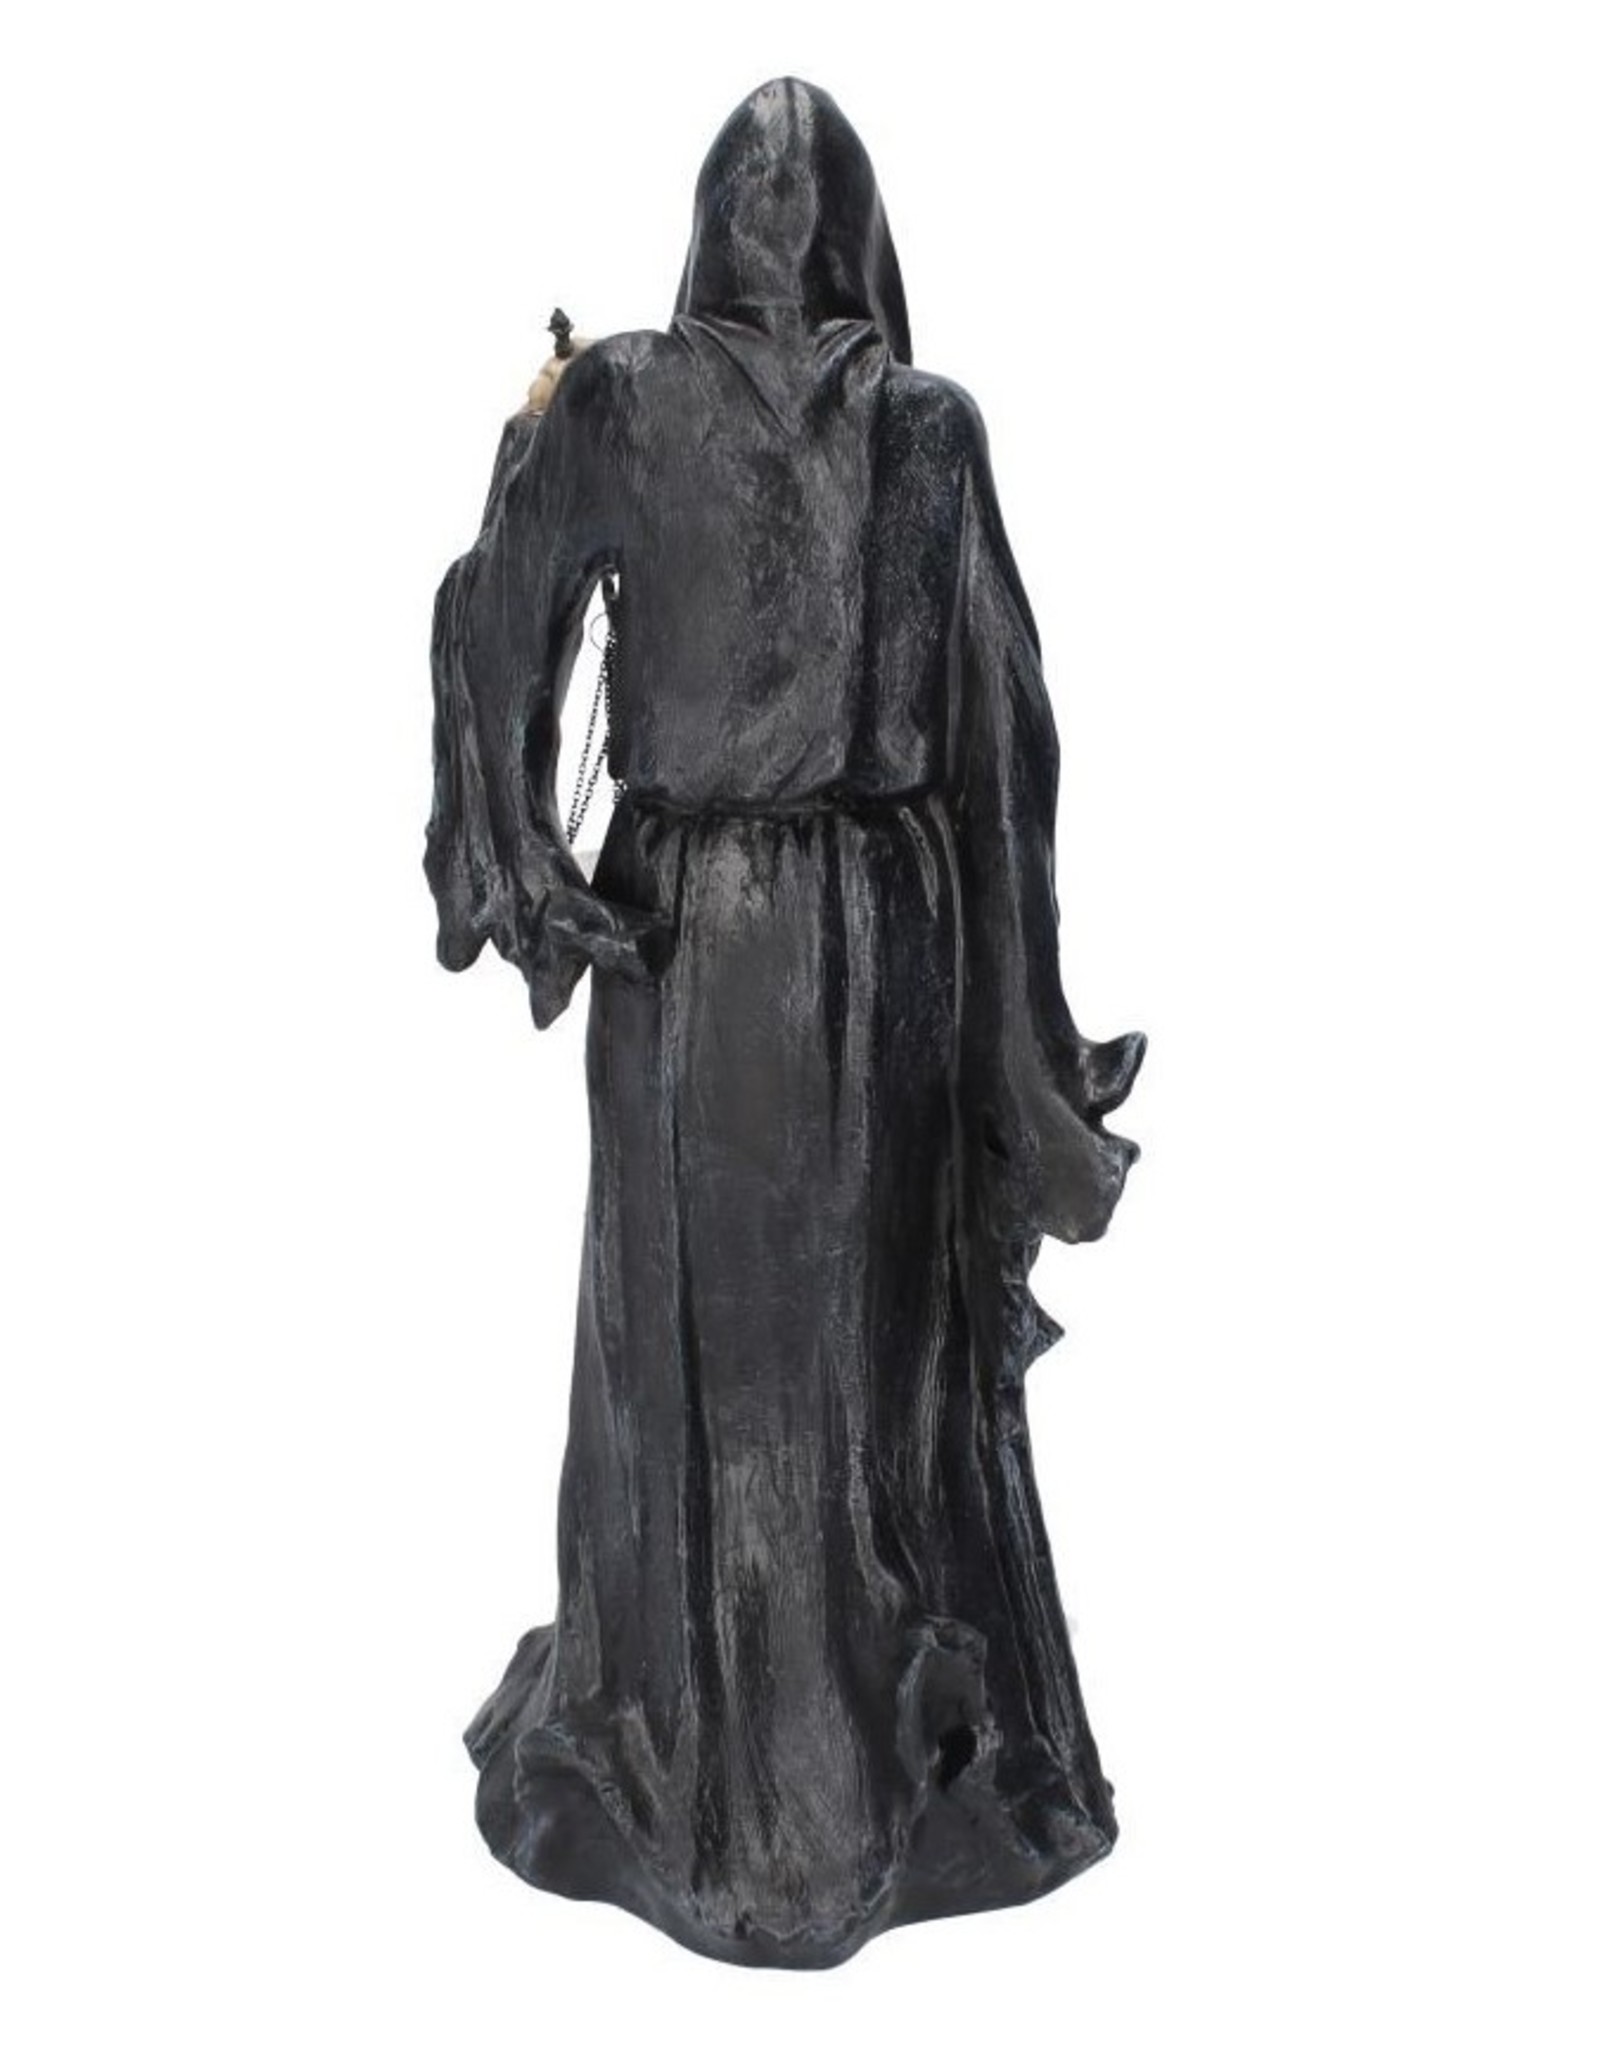 NemesisNow Giftware Figurines Collectables - Reaper Figurine Final Check 40cm